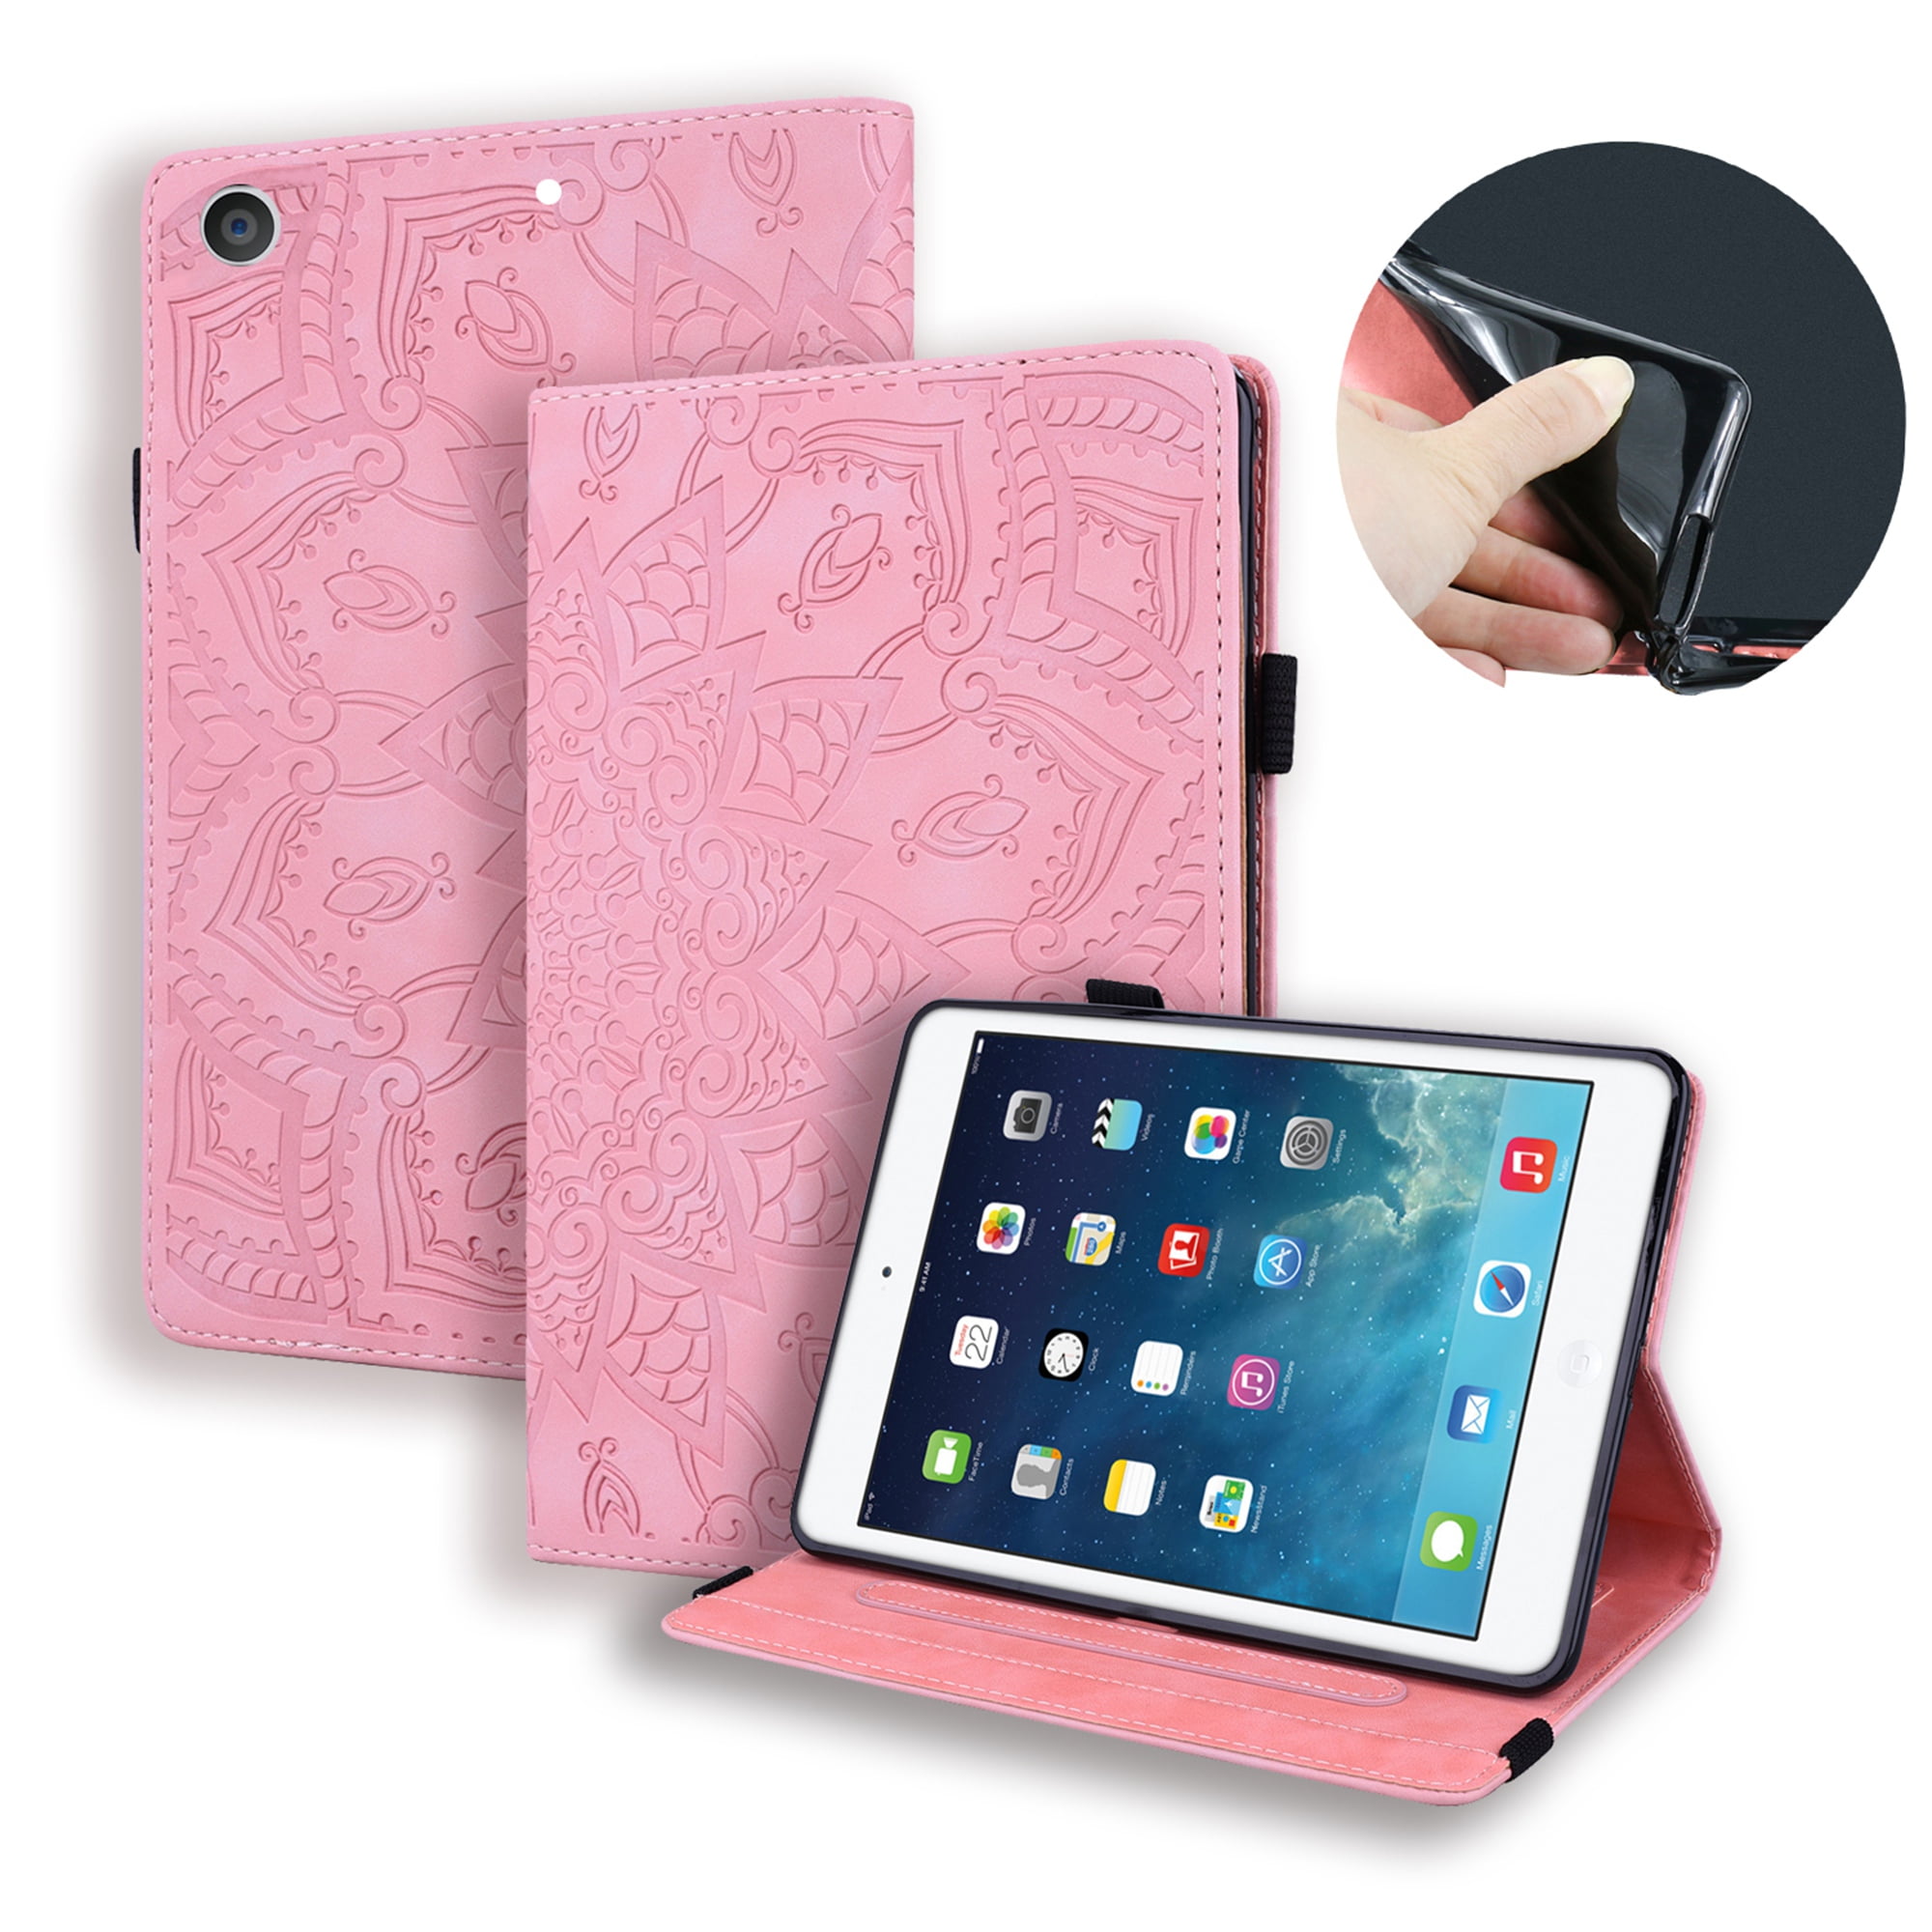 Portable Handbag iPad Wallet Flip Case PU Leather Magnetic Stand Cover with Handle Pocket Sleeve for iPad 7th Generation 10.2 inch iPad 7 Case New 2019 TechCode iPad 10.2 Case 7th Gen Hot Pink04 